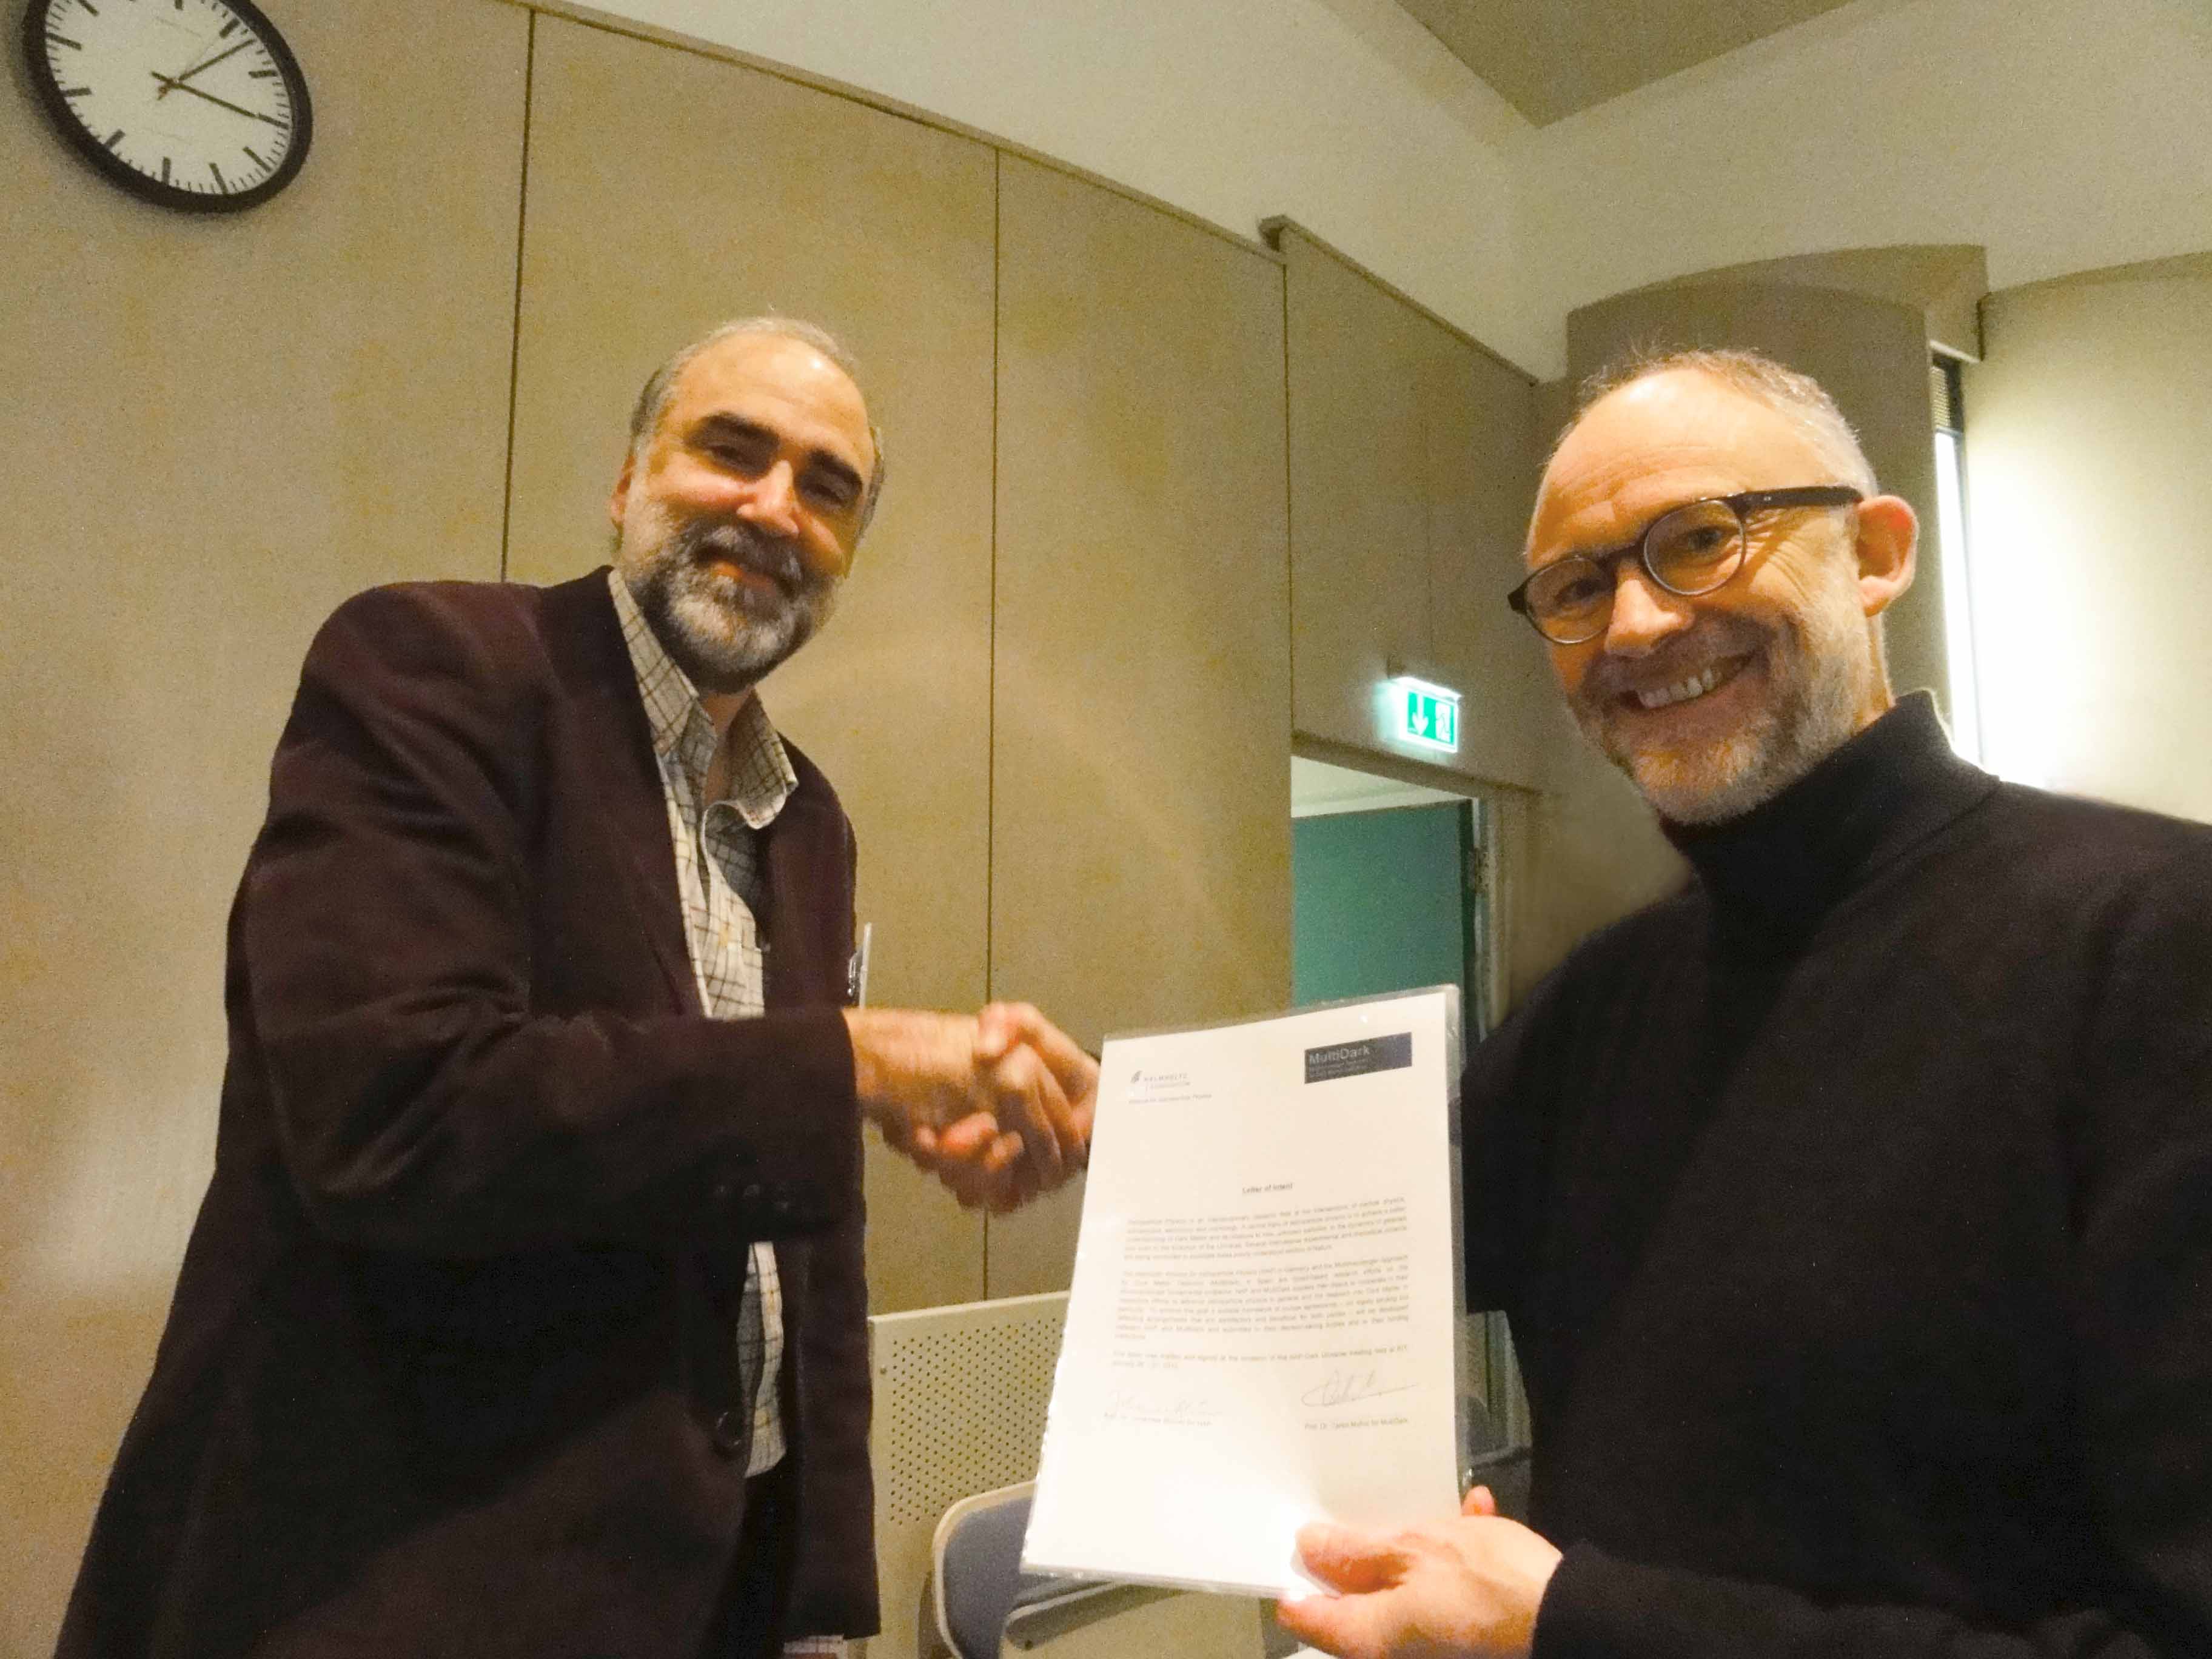  Prof. Dr. Muñoz and Prof. Dr. Blümer shaking hands after signing the Letter of Intent